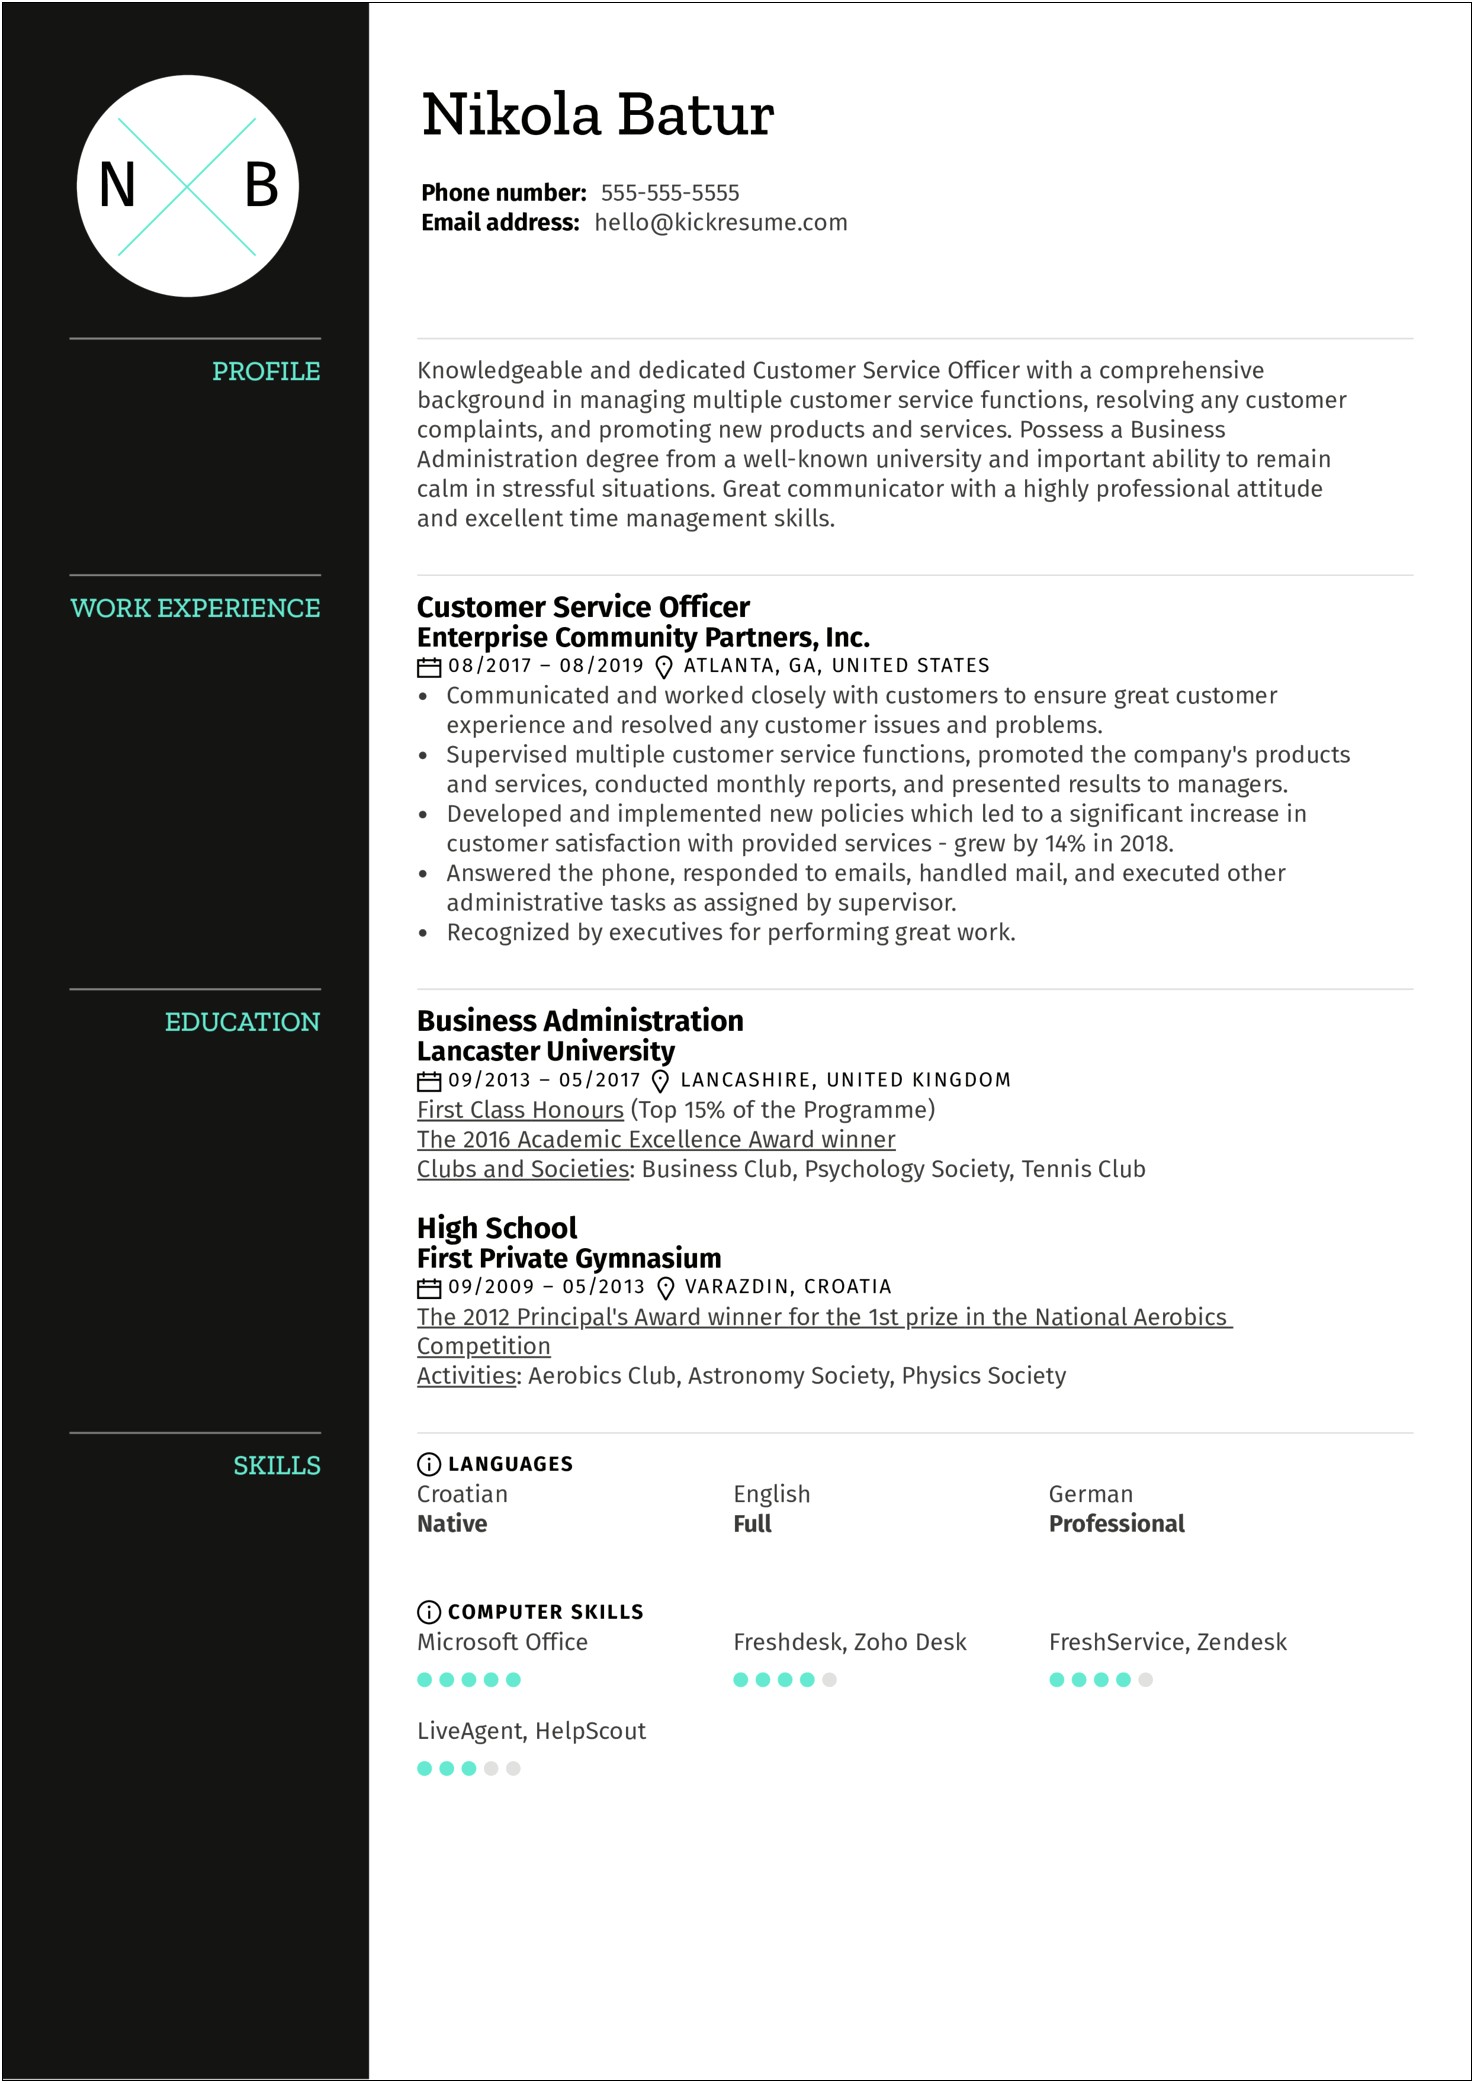 Best Vice President Communications Resume Examples